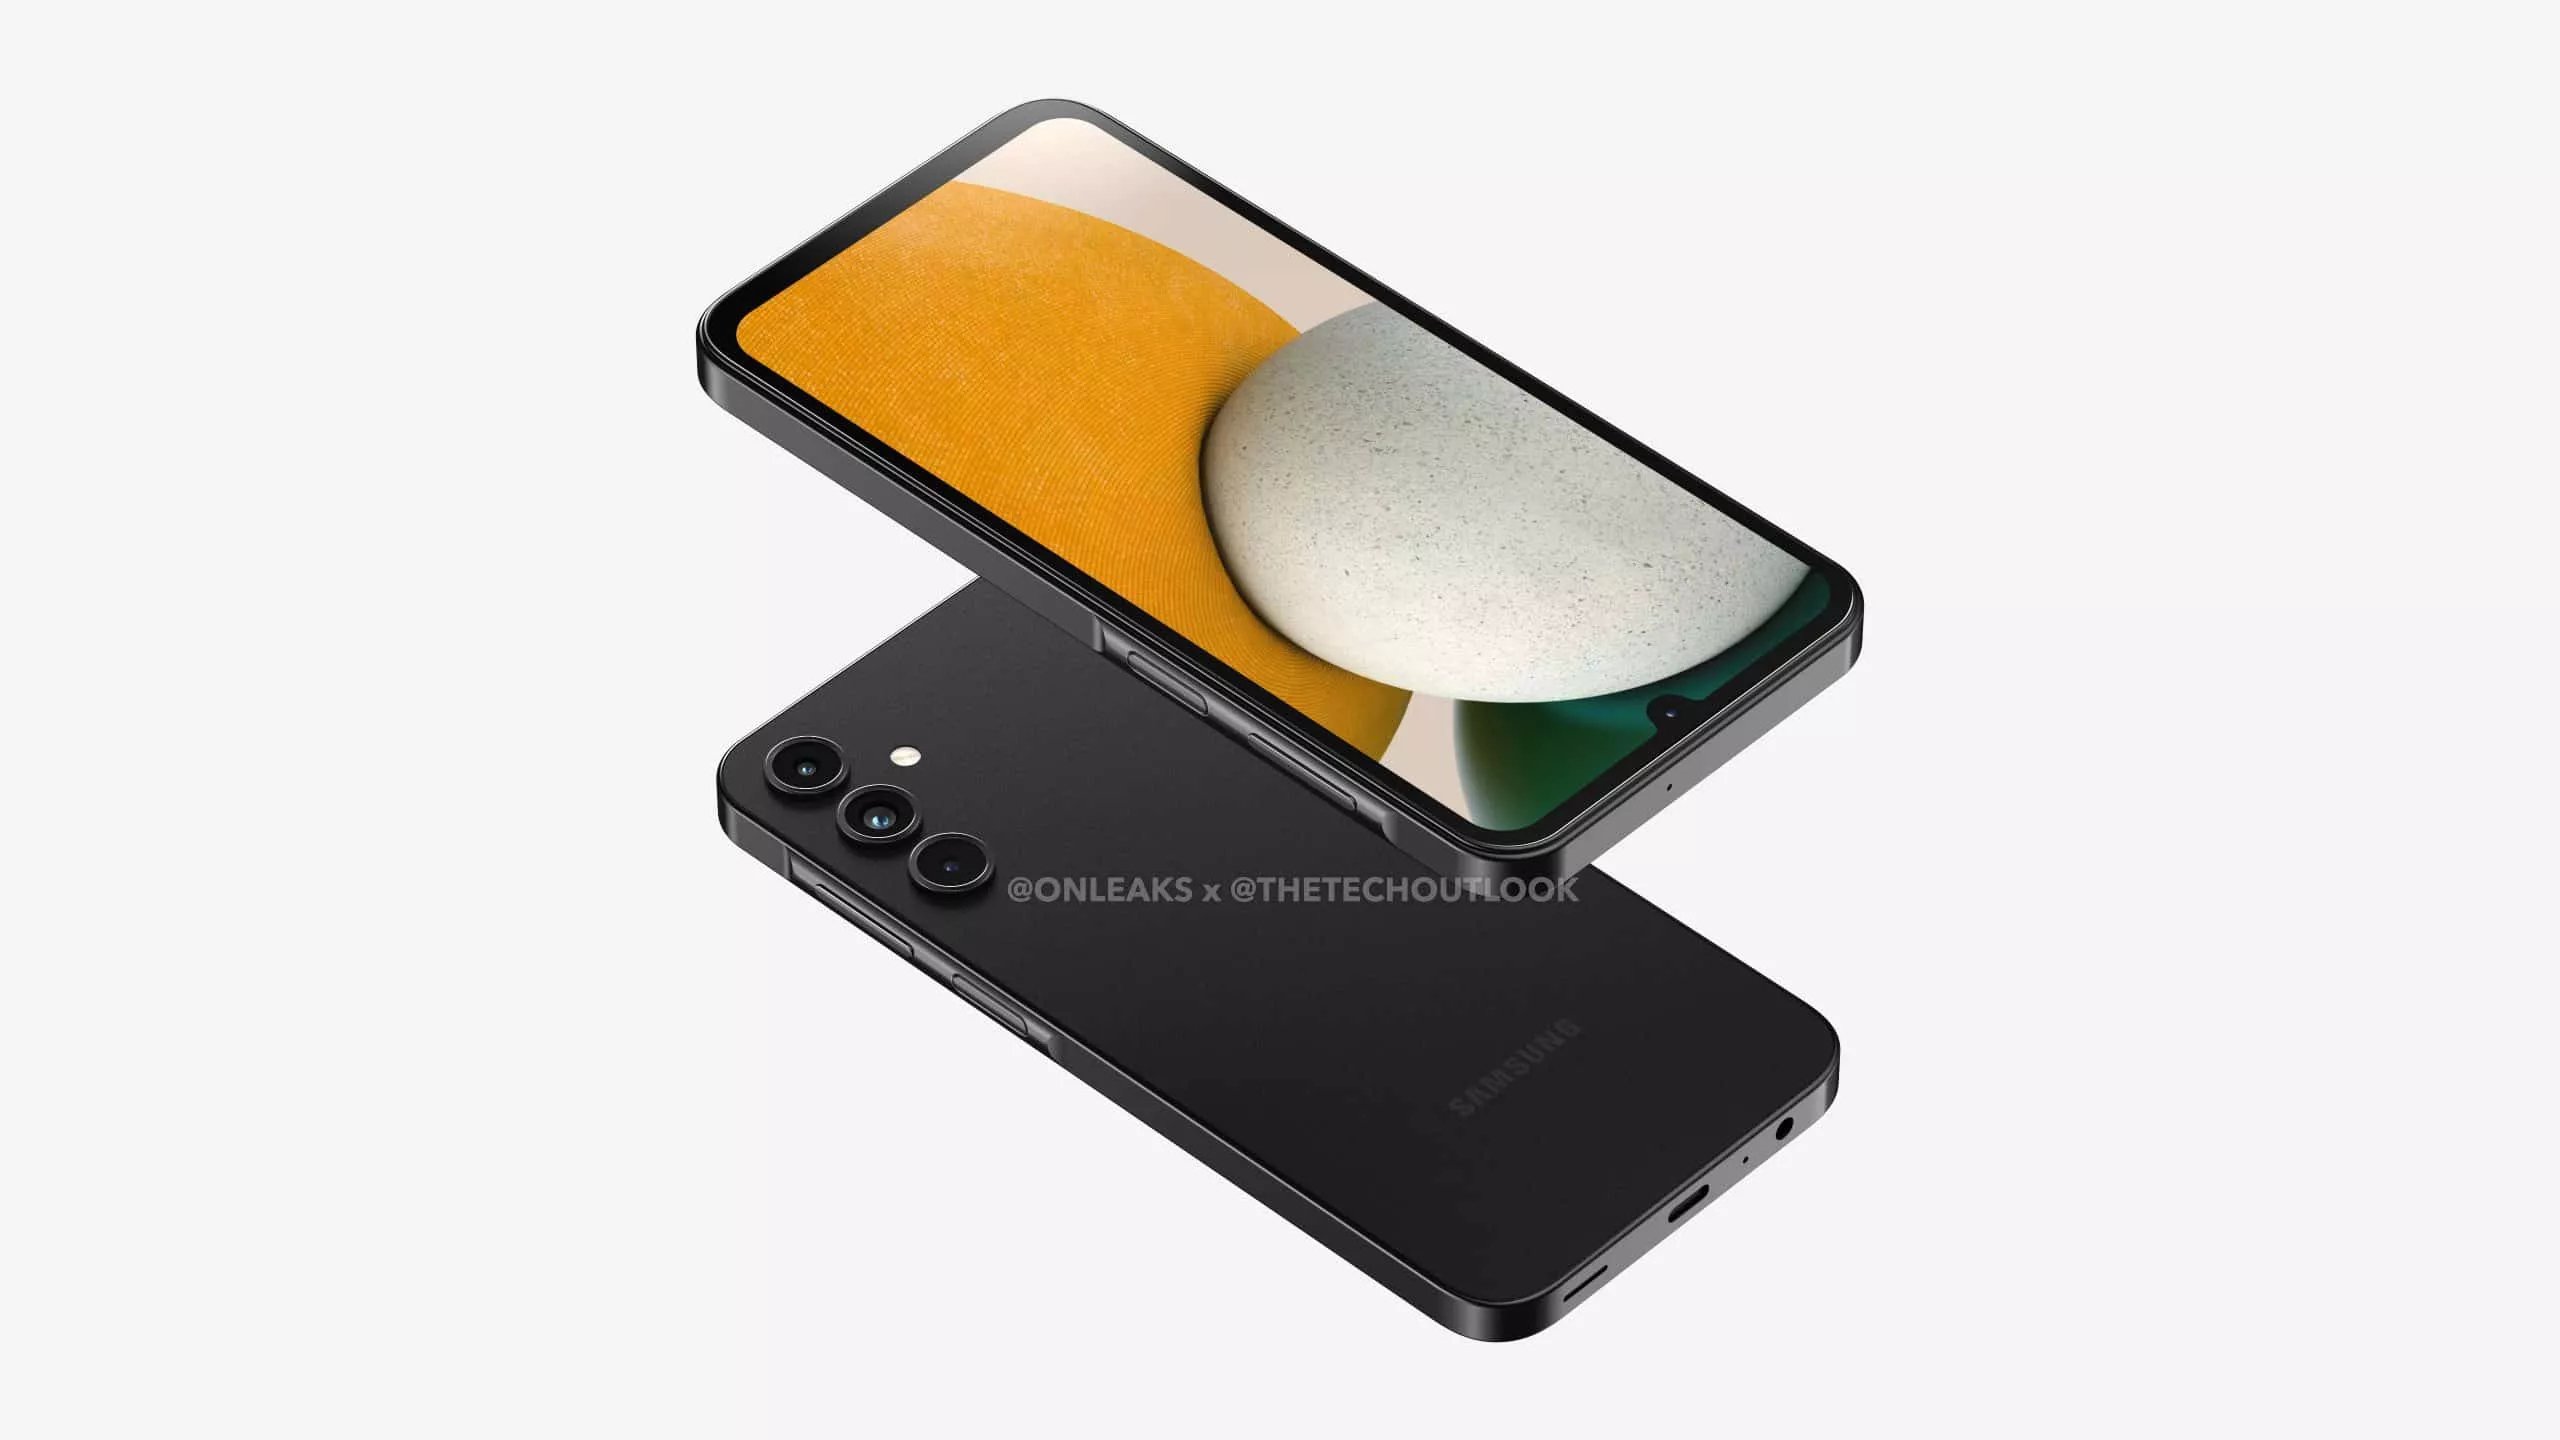 90Hz OLED display, MediaTek Dimensity 6100+ chip and 50 MP camera: Samsung Galaxy A15 5G specs have surfaced online